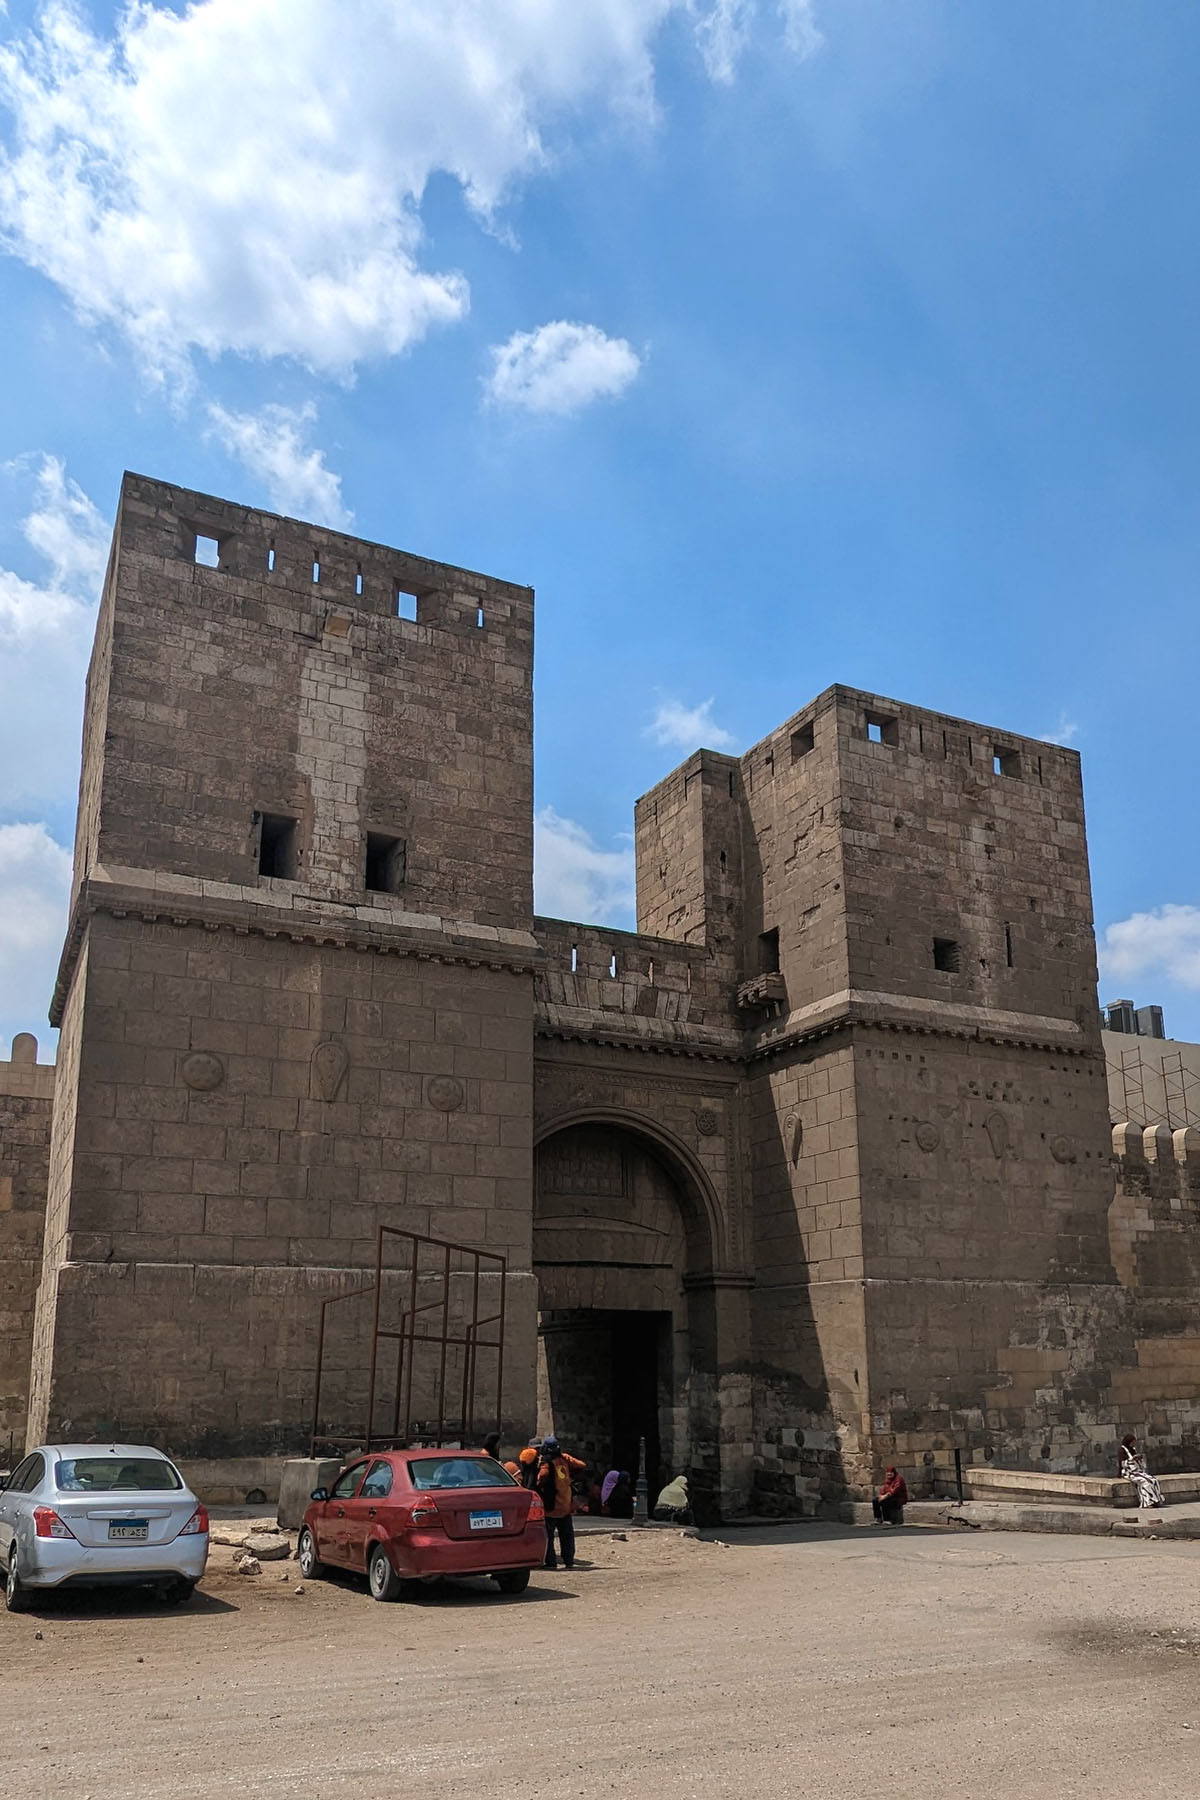 The medieval gate of Bab al-Nasr stands on a street with a few packed cars in Cairo. It has huge square towers that flank an ornate arch.